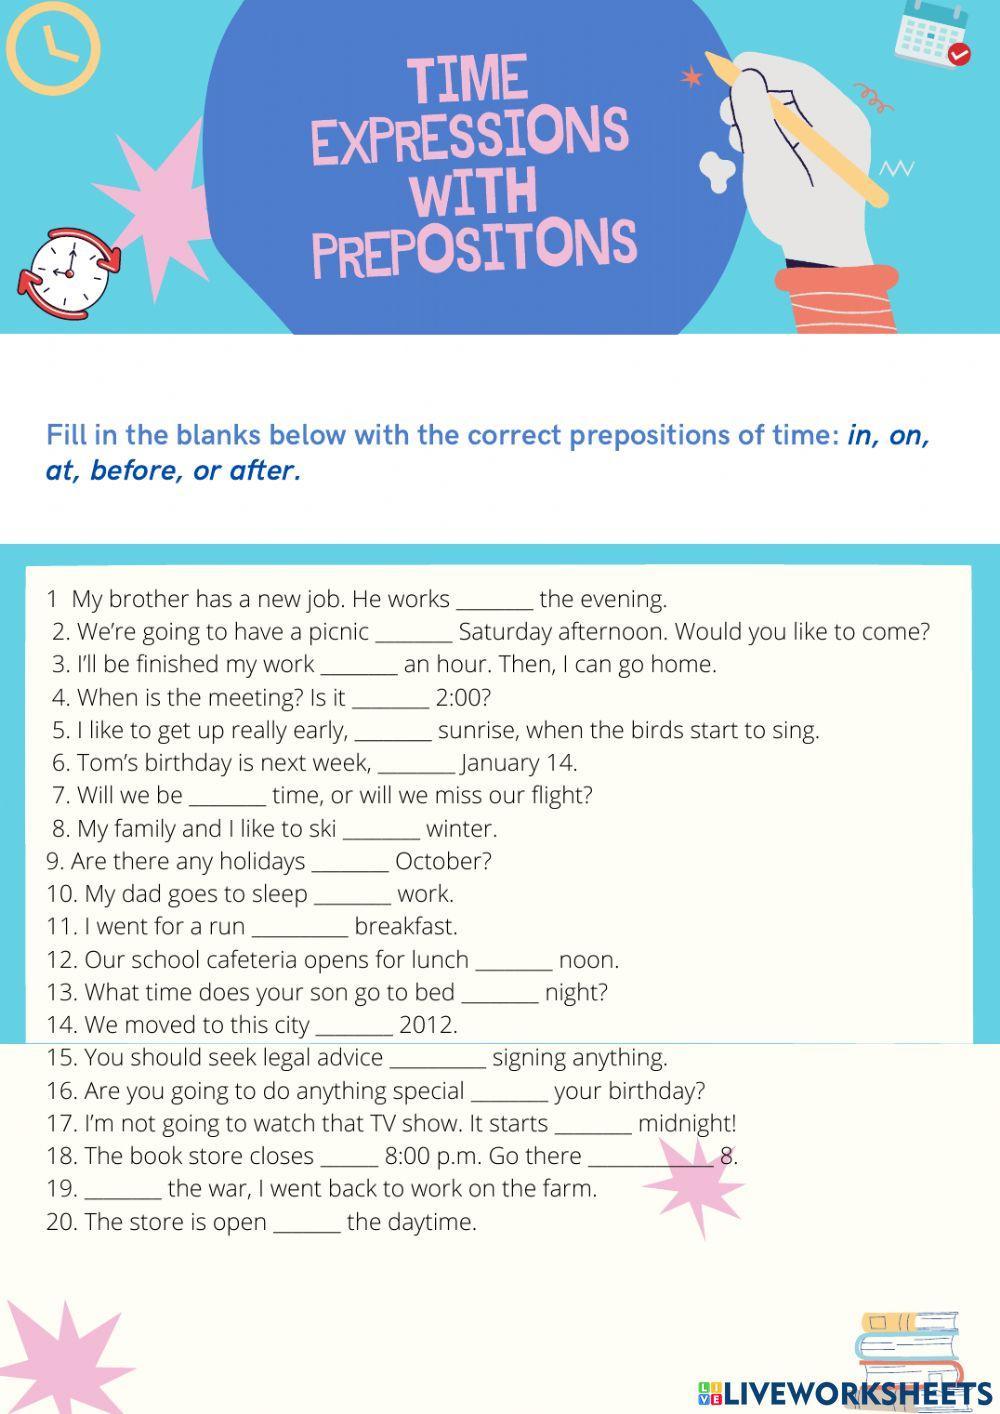 Time Expressions with Prepositions